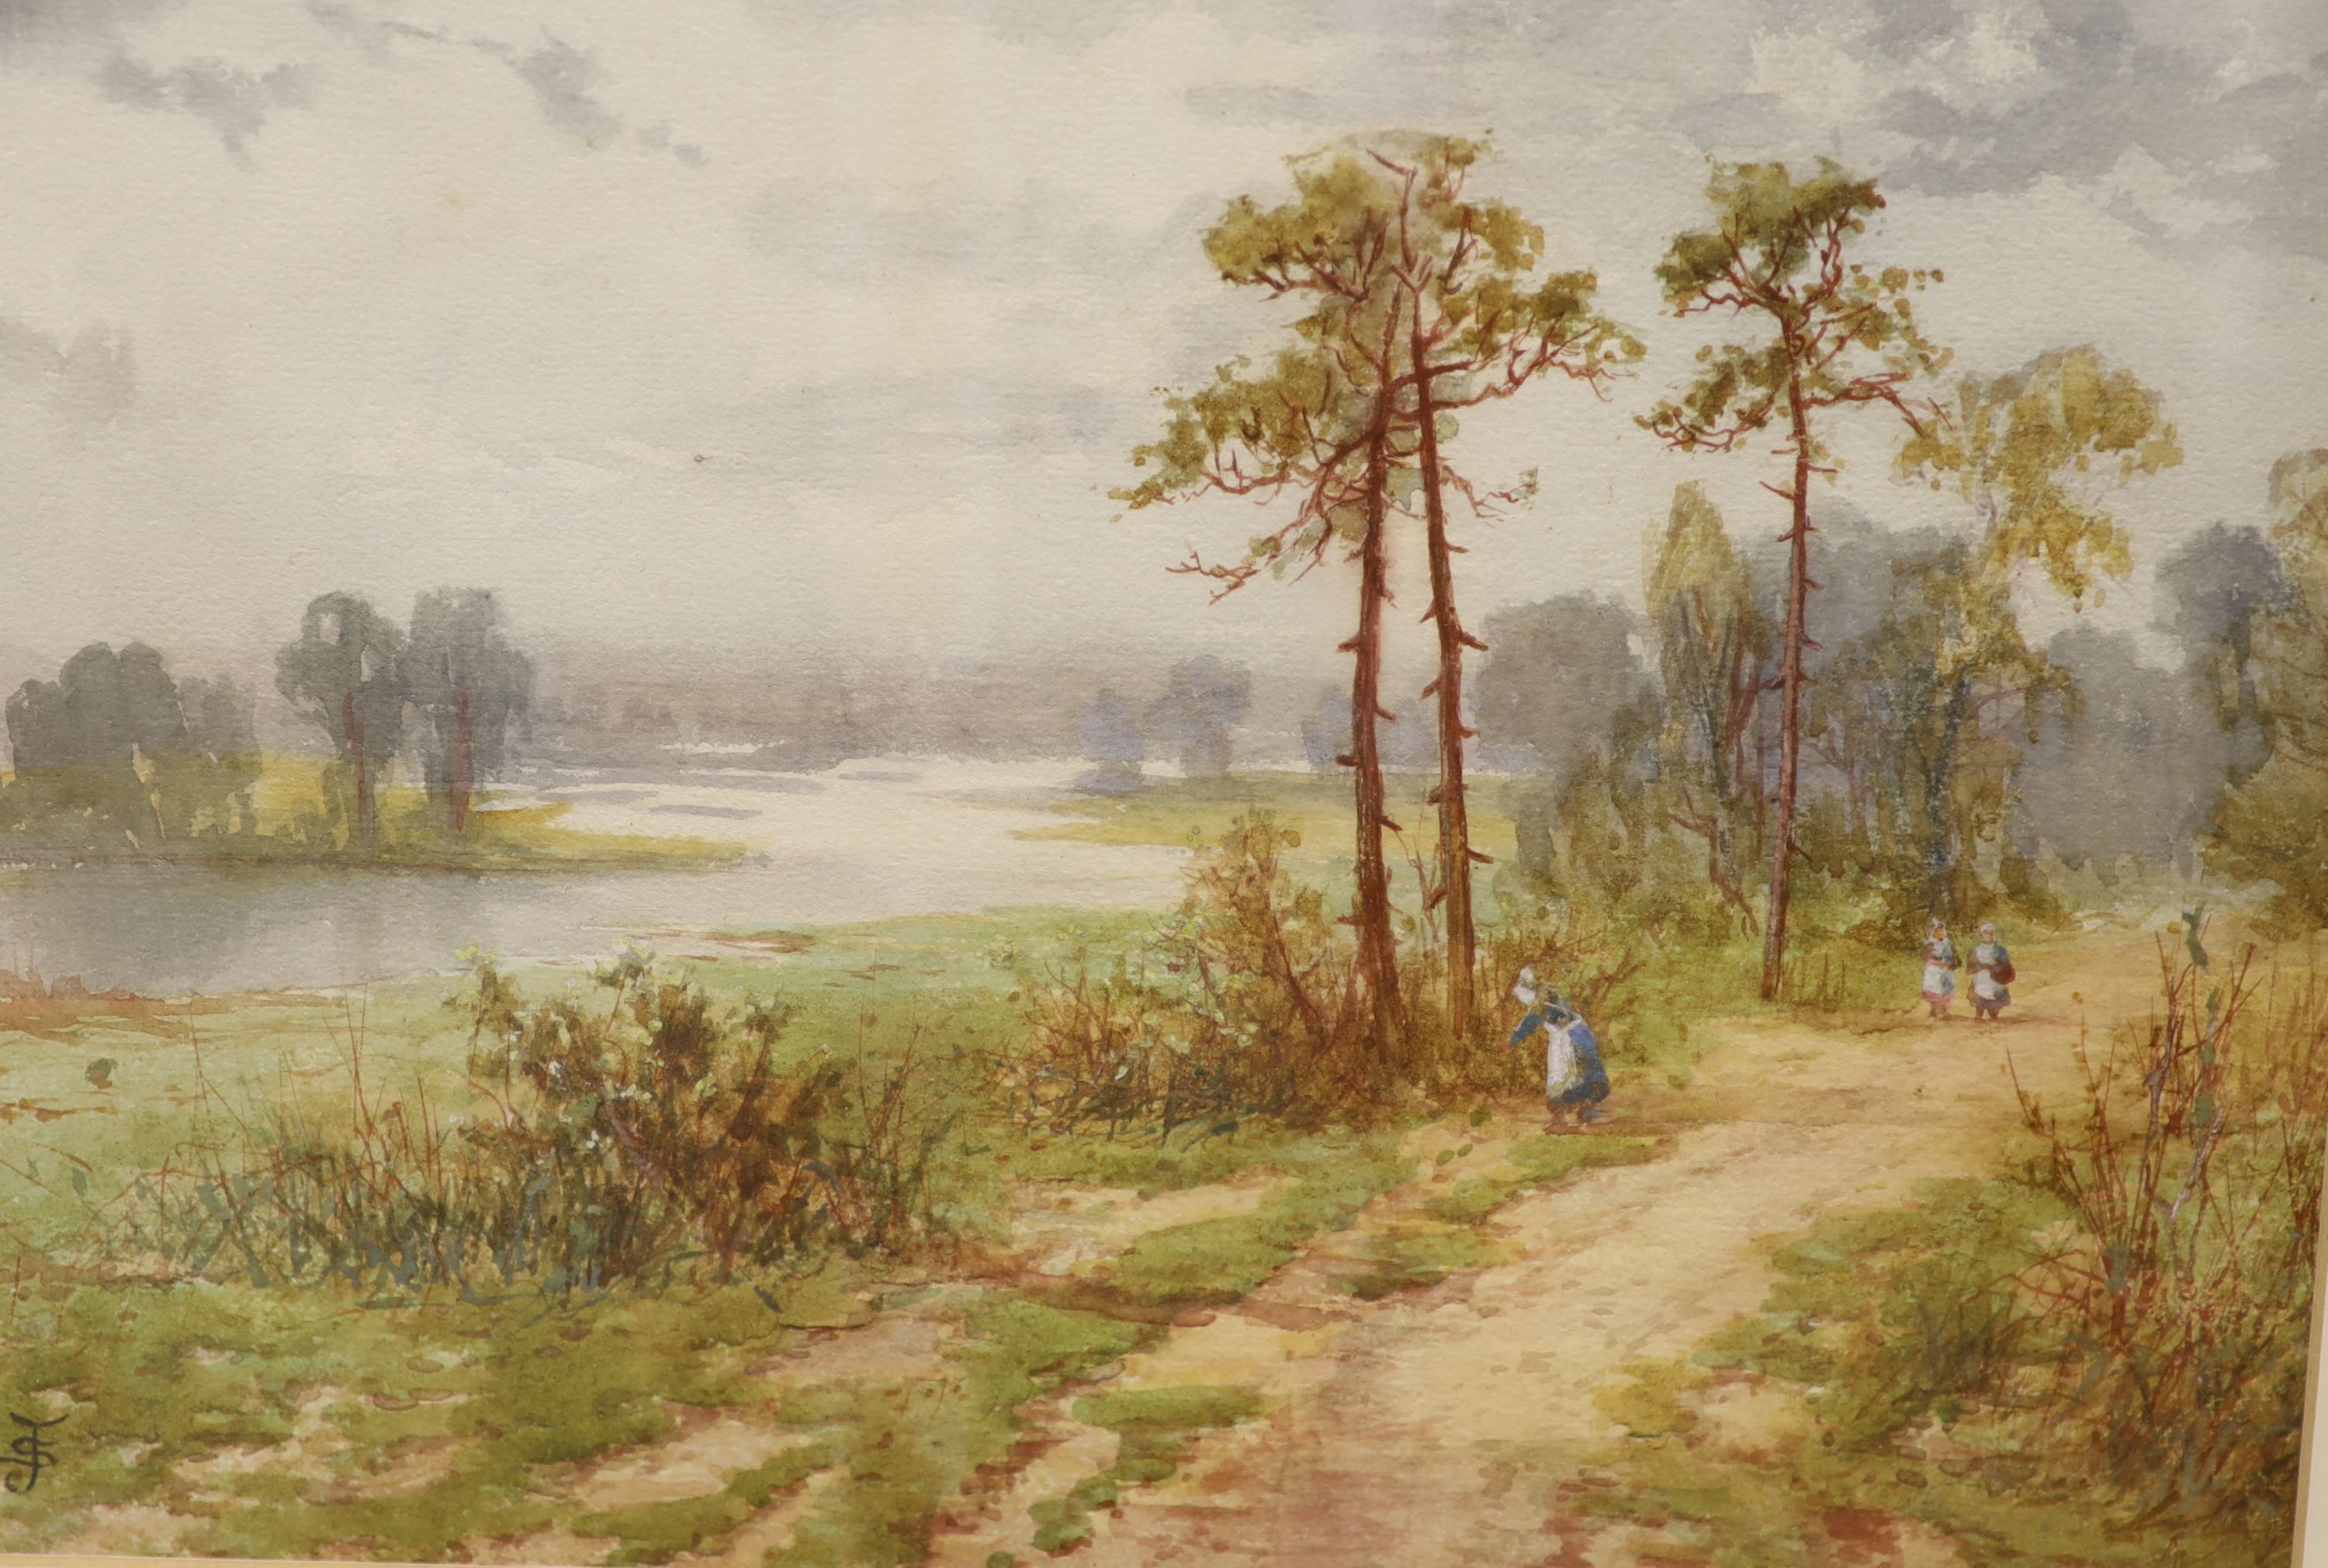 Three assorted watercolours: River landscape by Sydney Yates Johnson, 26 x 36cm, a study of a garden gateway at Marshalls Wick by E.N. Barclay 1905, 37 x 24cm and a View of Keymer Church by S.E. Field in 1864, 32 x 40cm